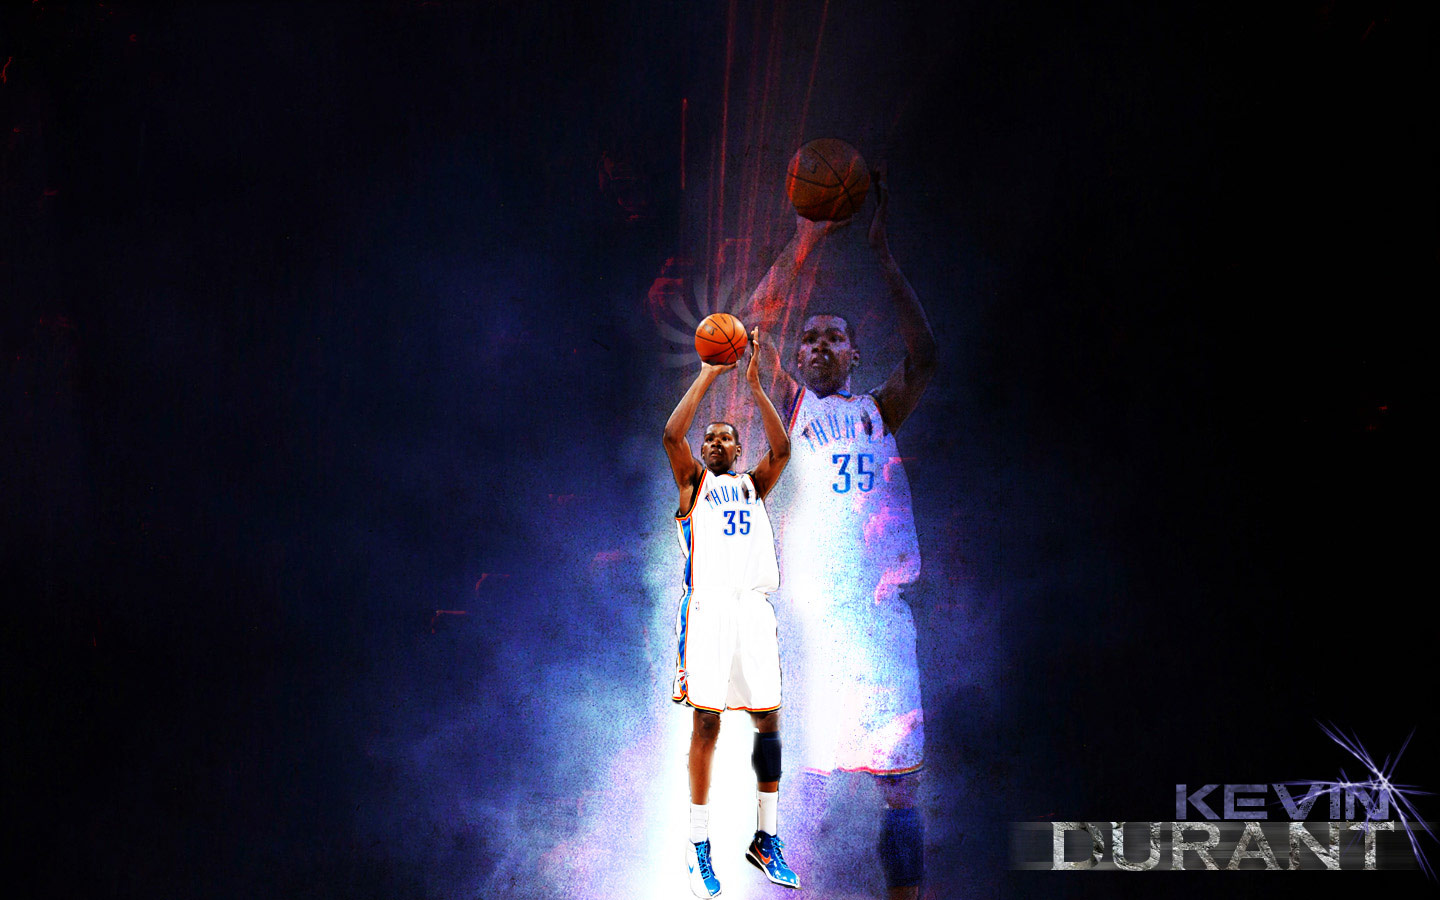 westbrook and durant wallpaper